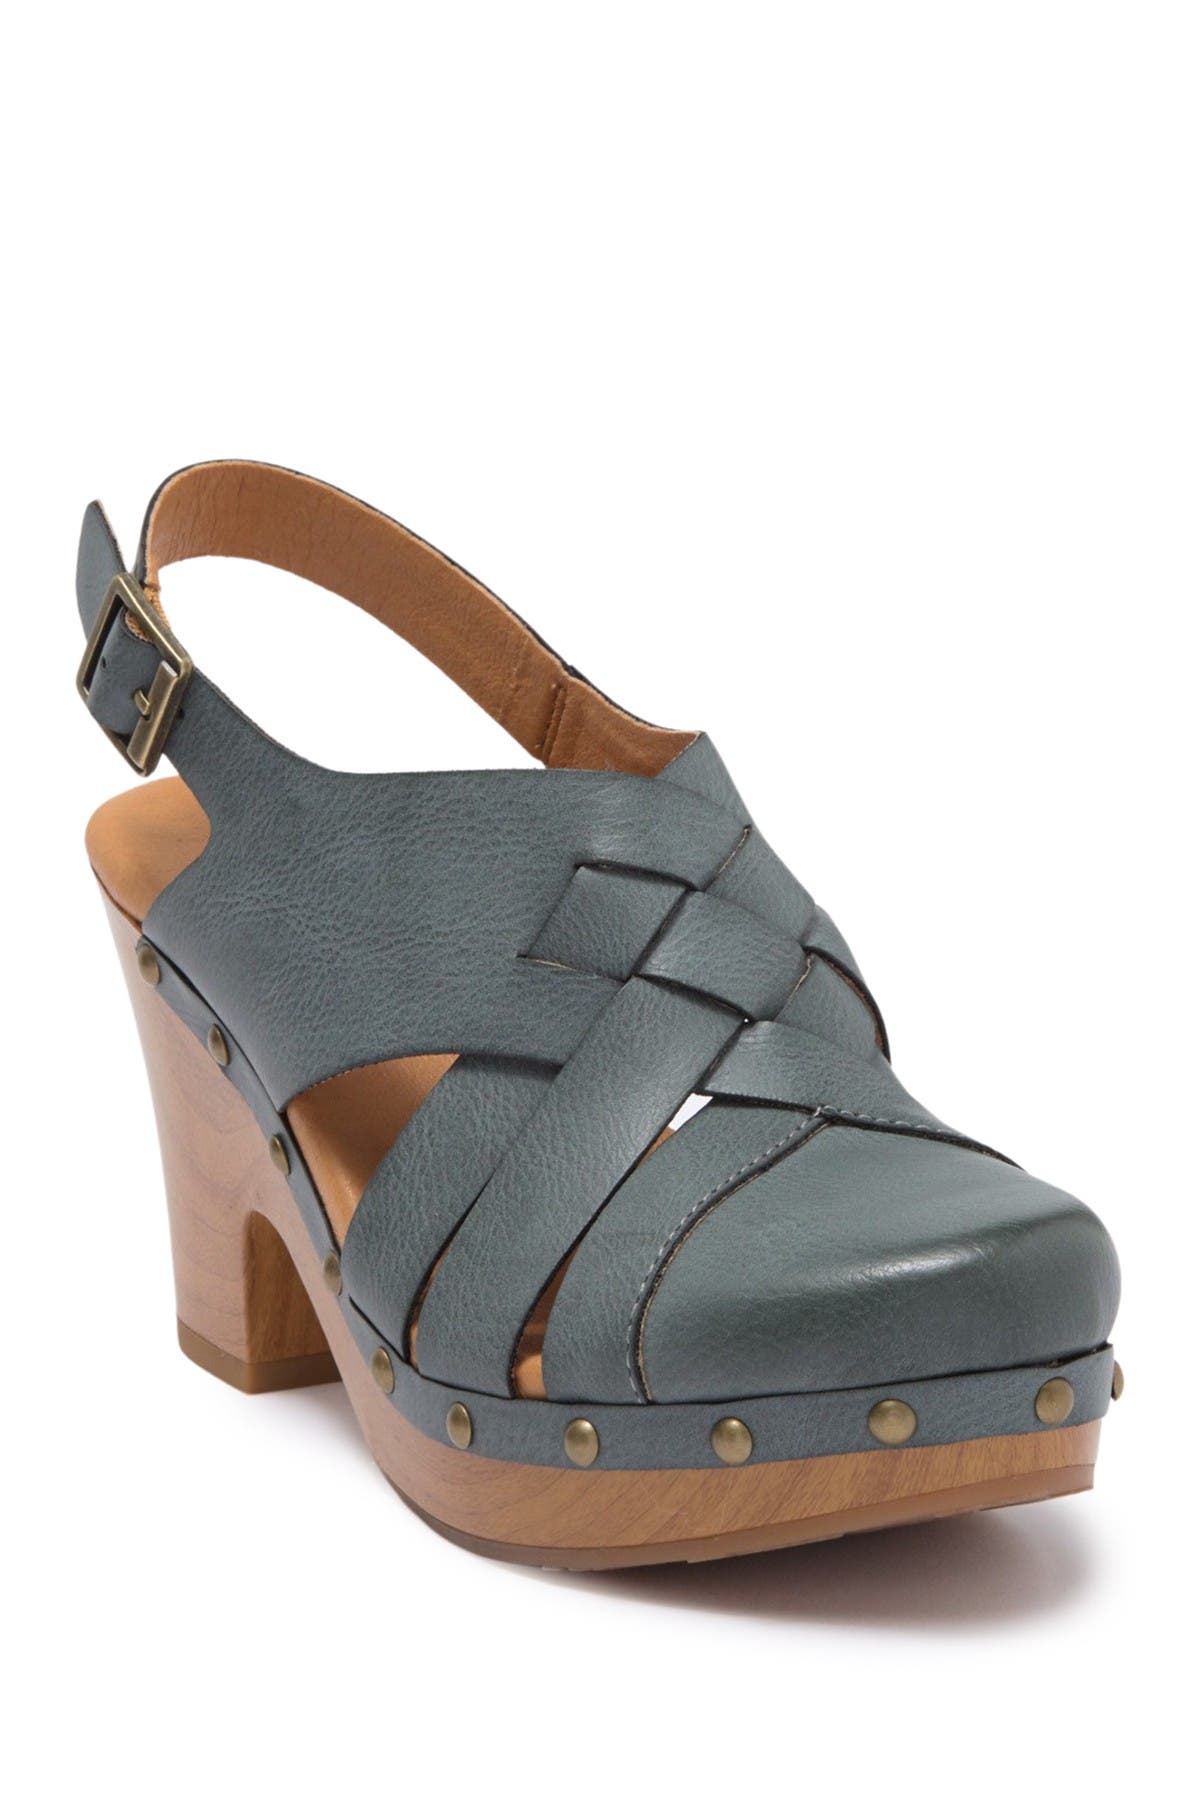 Buy > strappy clog sandals > in stock